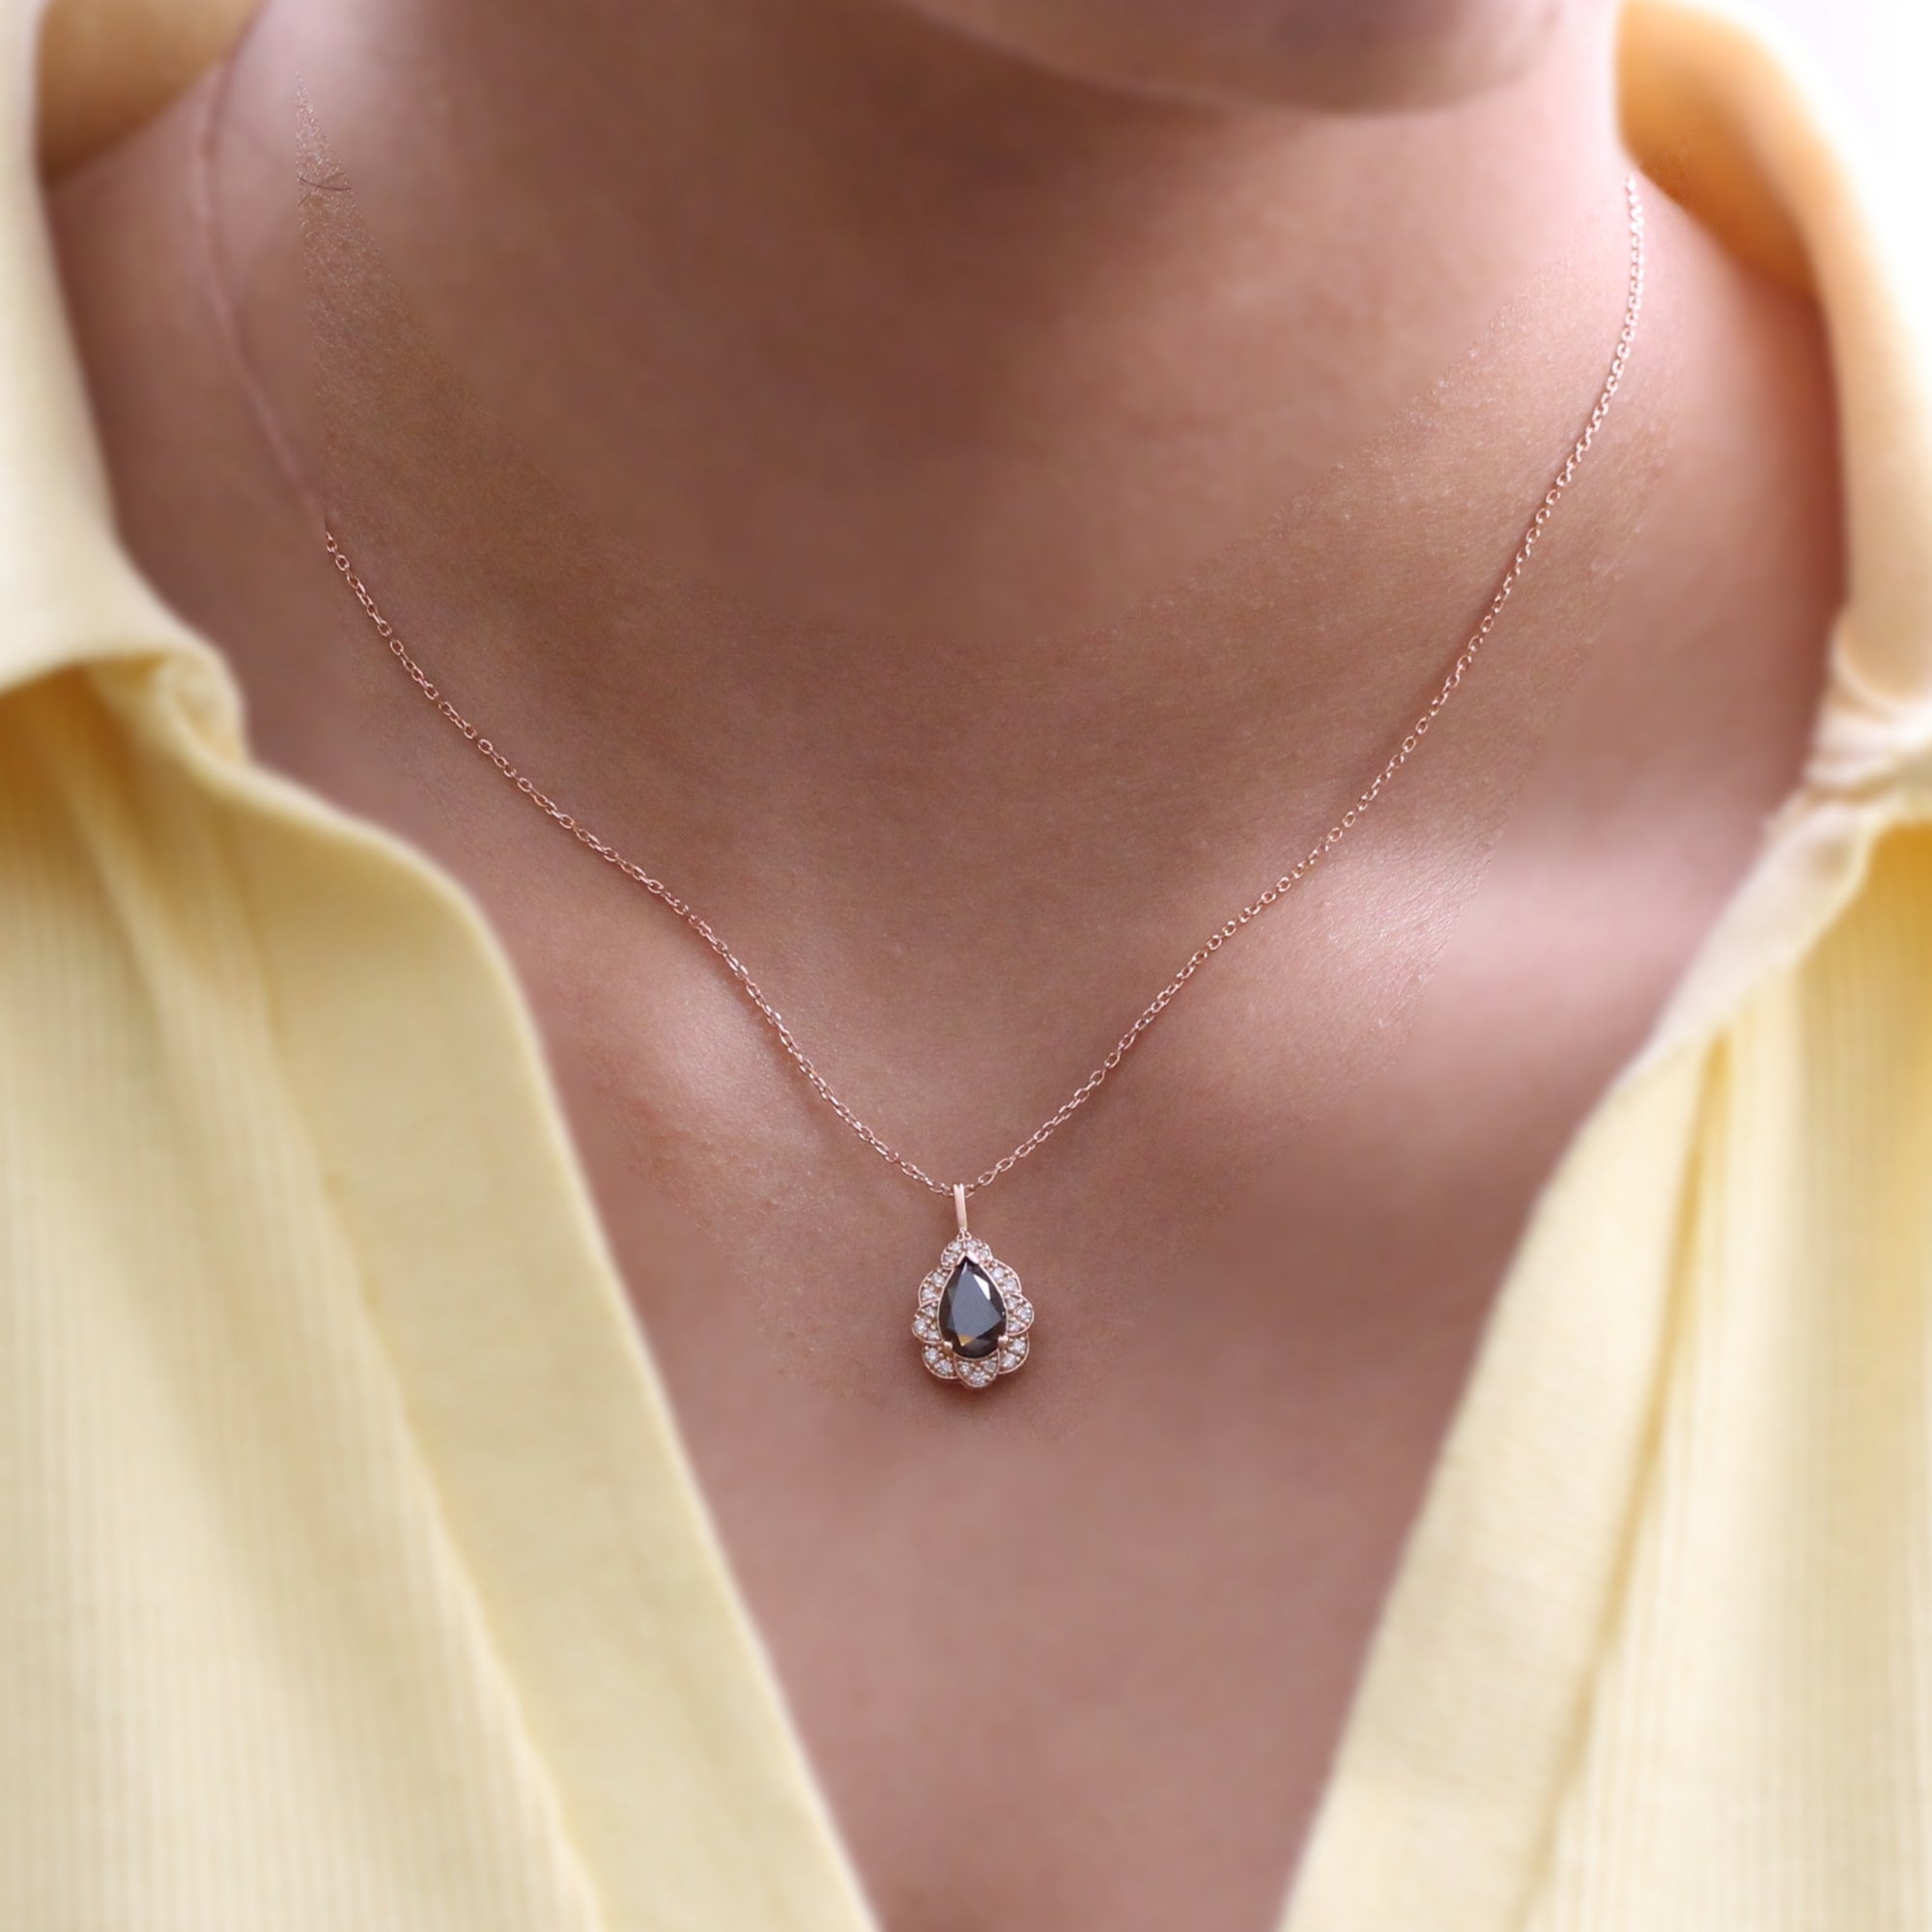 Vintage Halo Pear Black Diamond Pendant Rose Gold Drop Necklace 14K White Gold - Made to Order